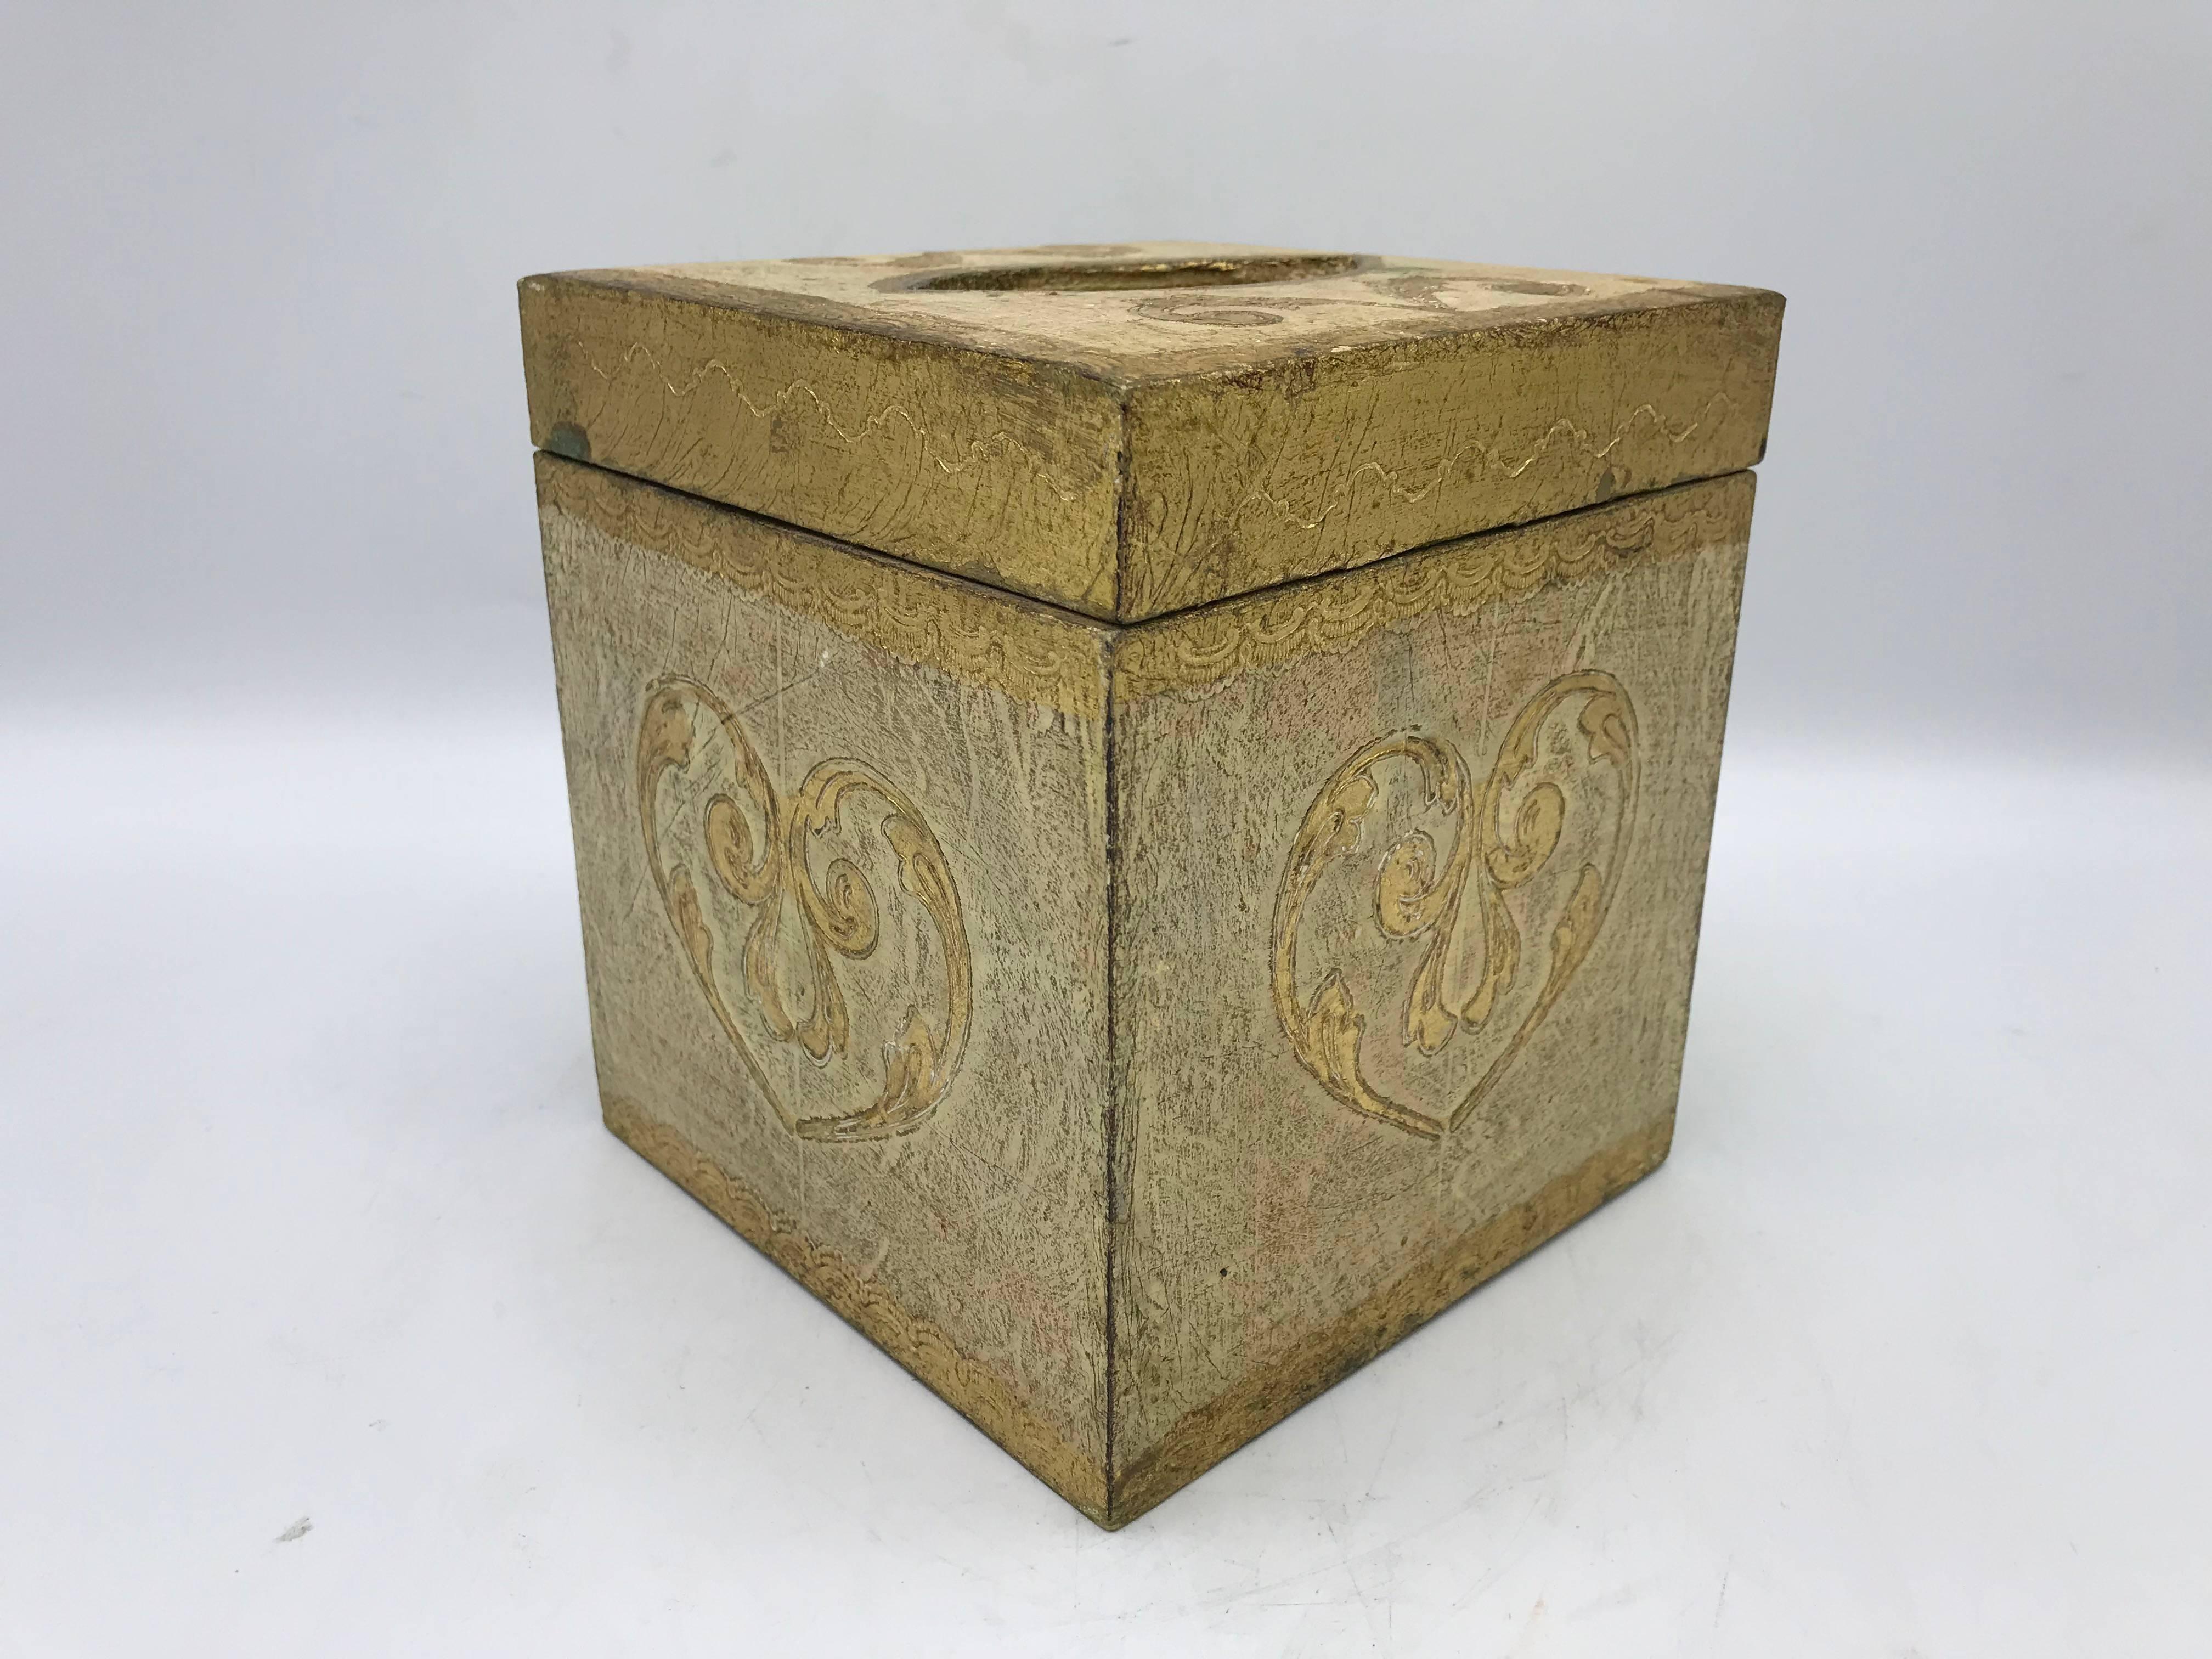 Offered is a beautiful, 1960s Italian Florentine gold and yellow damask motif, tissue box cover.